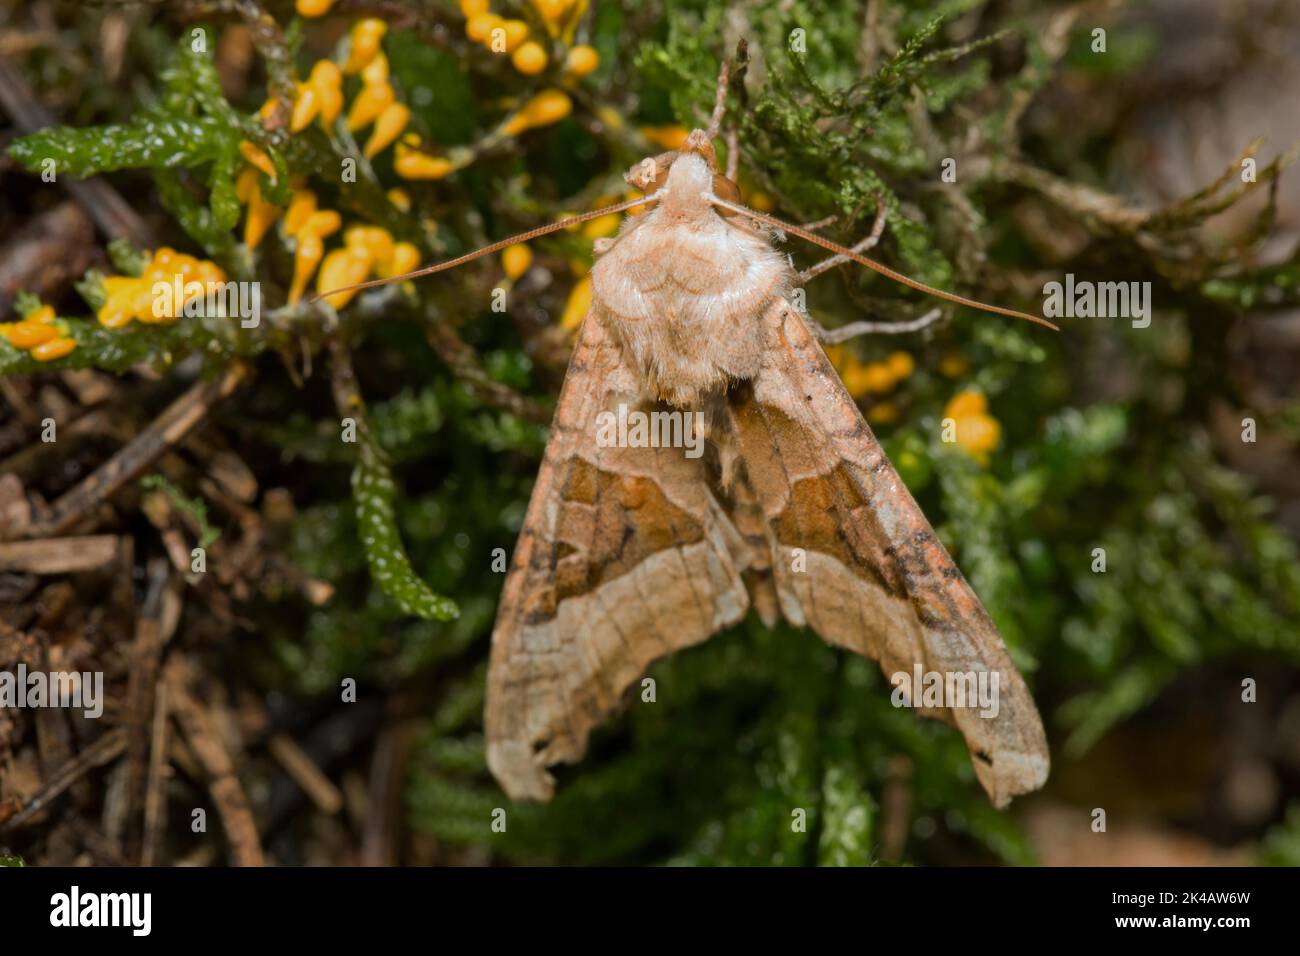 Agate Owl butterfly with closed wings sitting on green moss with yellow lion fruit from behind Stock Photo